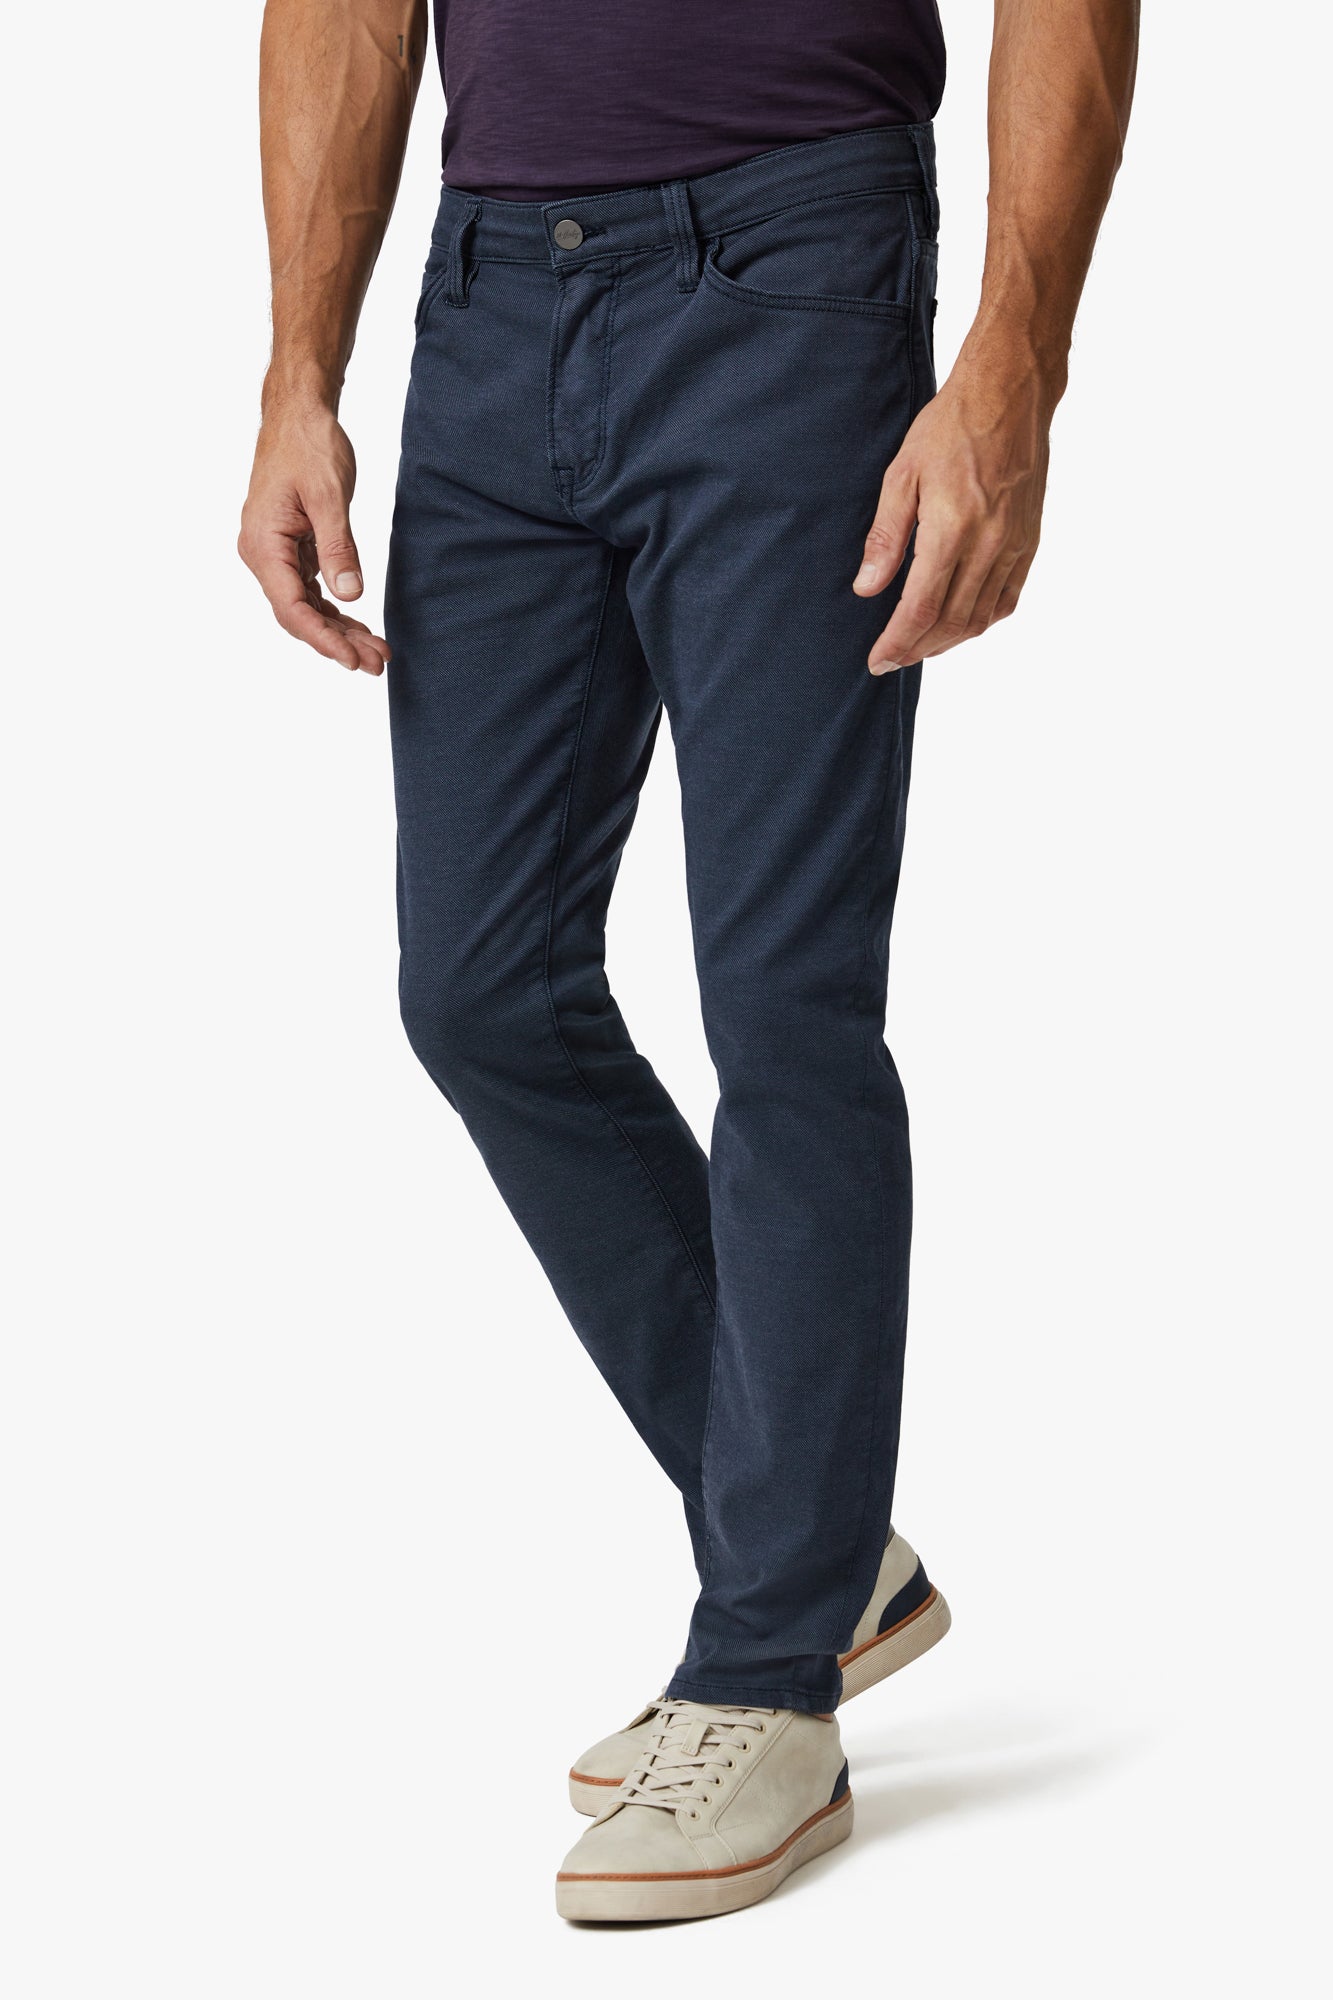 Cool Tapered Leg Pants In Navy CoolMax Image 3